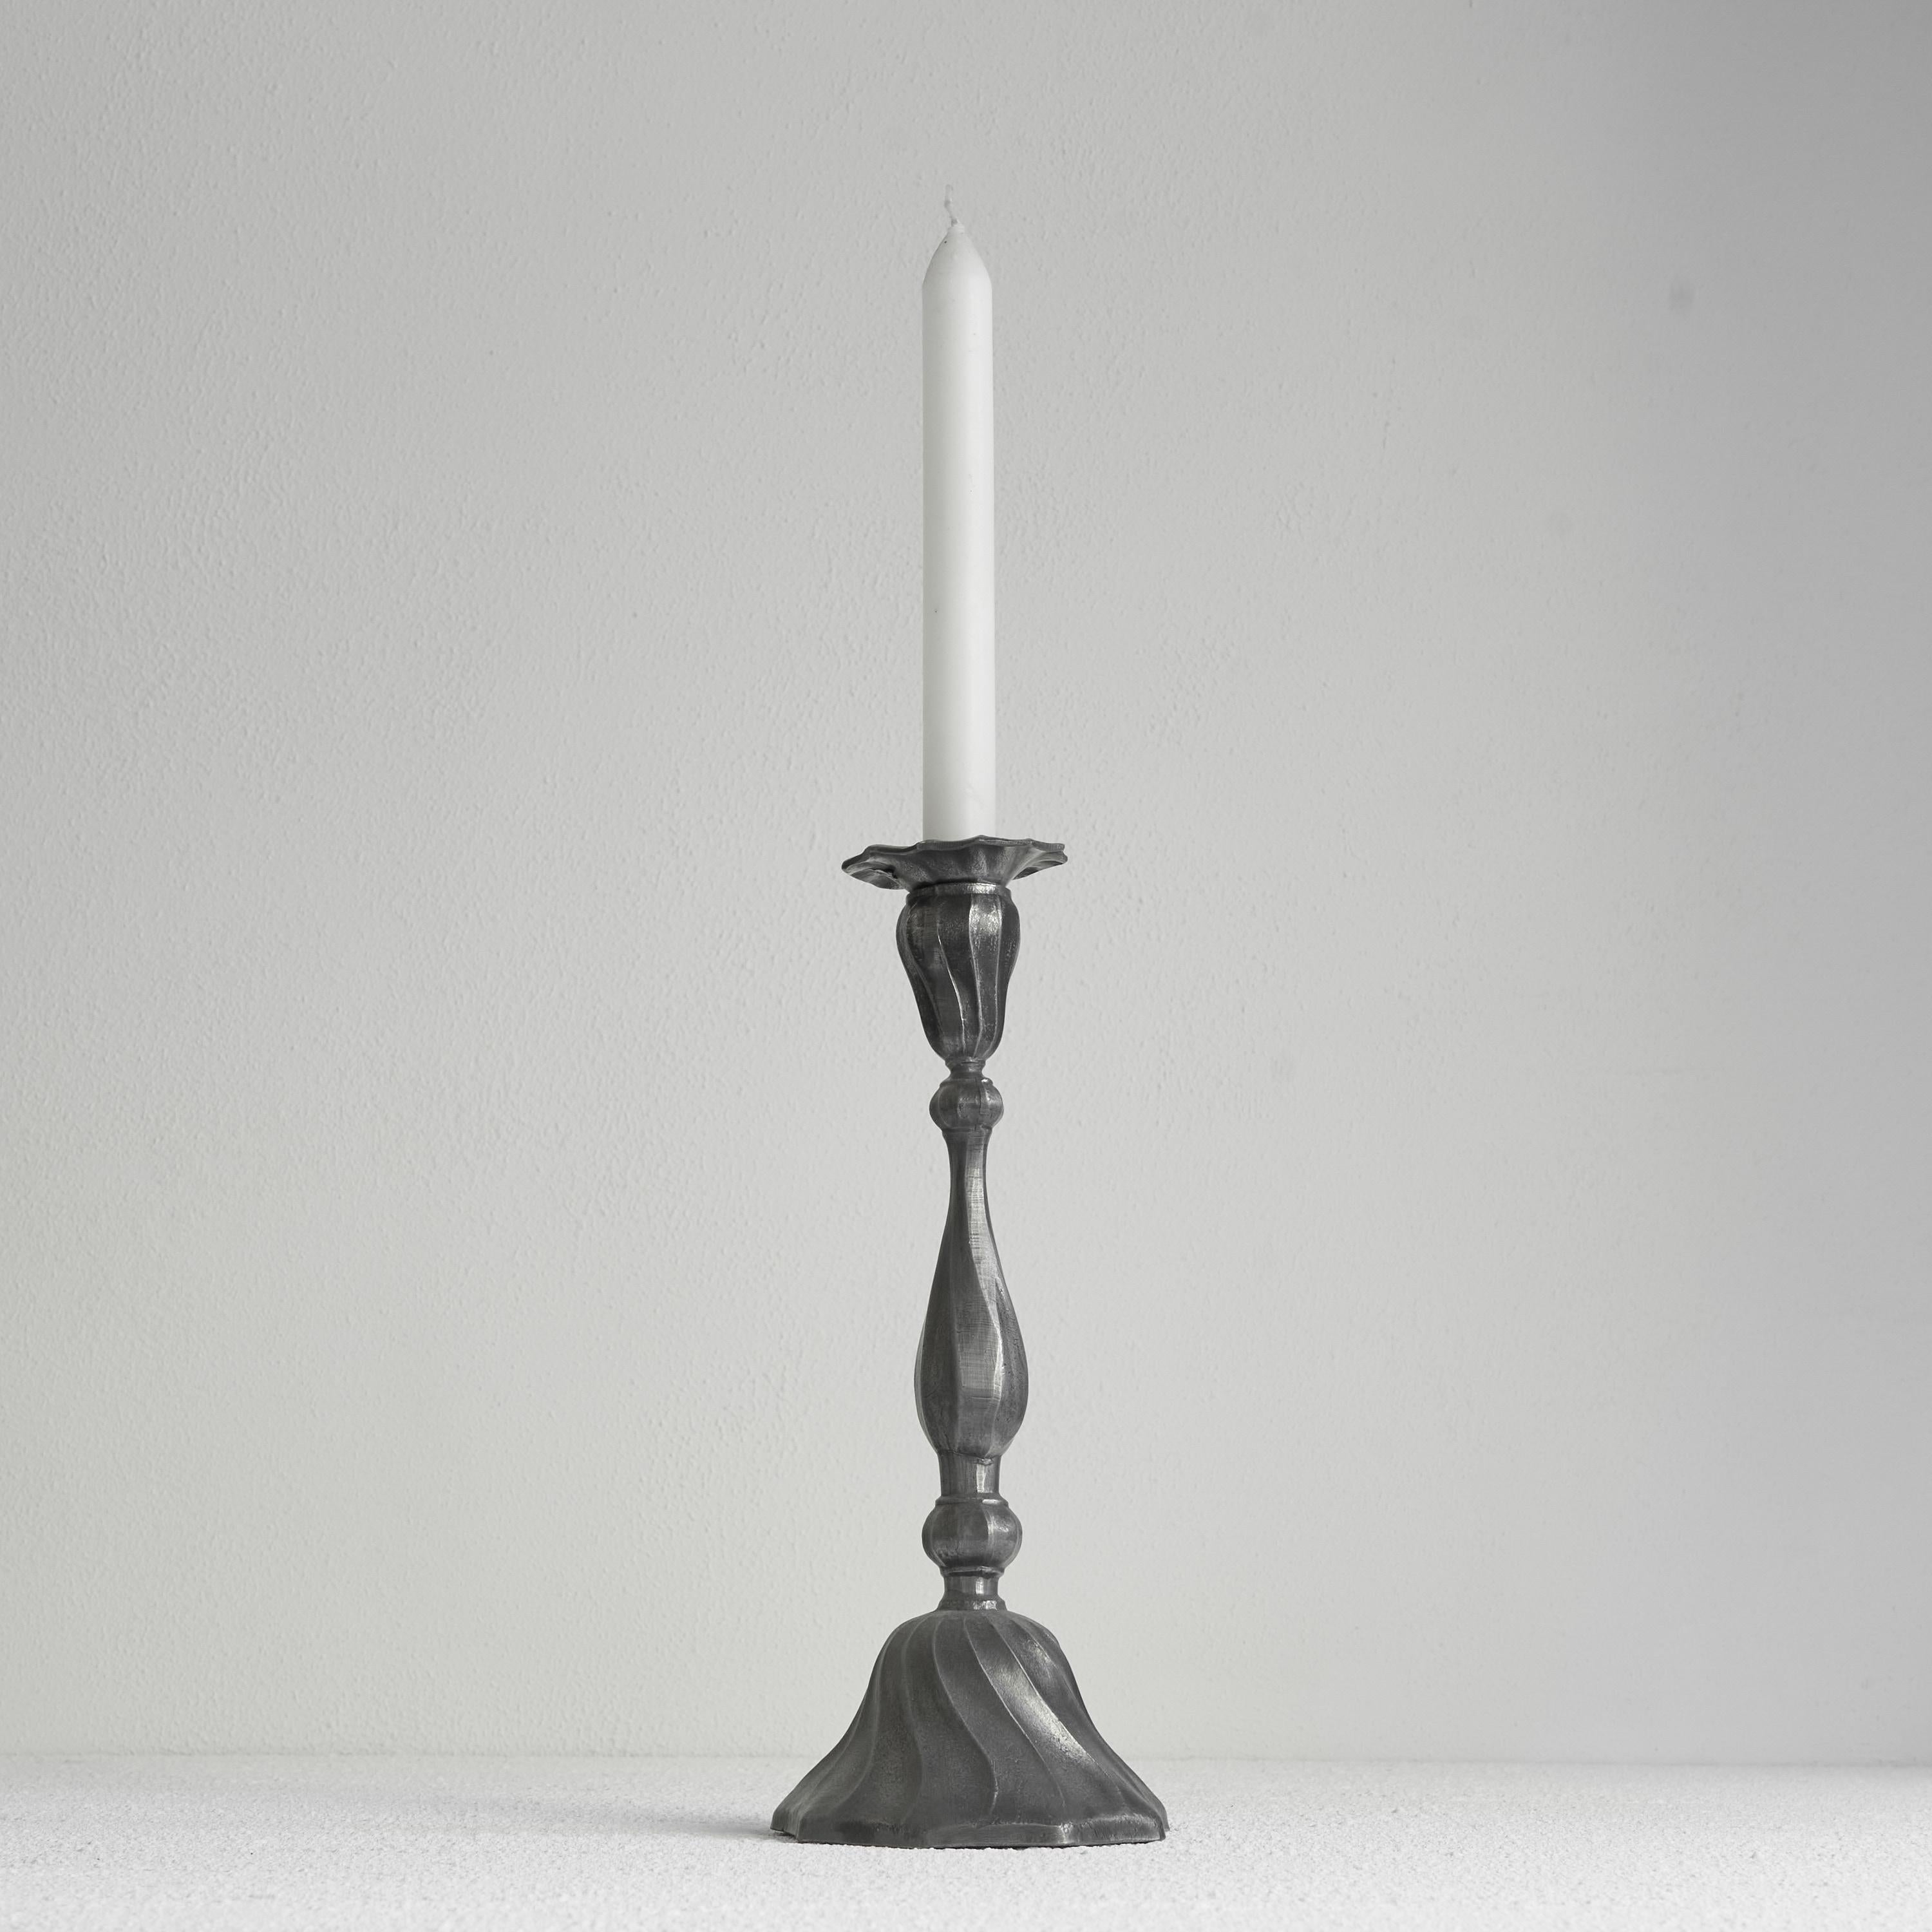 Elegant Art Nouveau candlestick in Pewter 1920s.

Very elegant and large candlestick with a very distinct Art Nouveau style. Organic and joyful, this candlestick is interesting from every corner. The patinated pewter surface is very stylish and